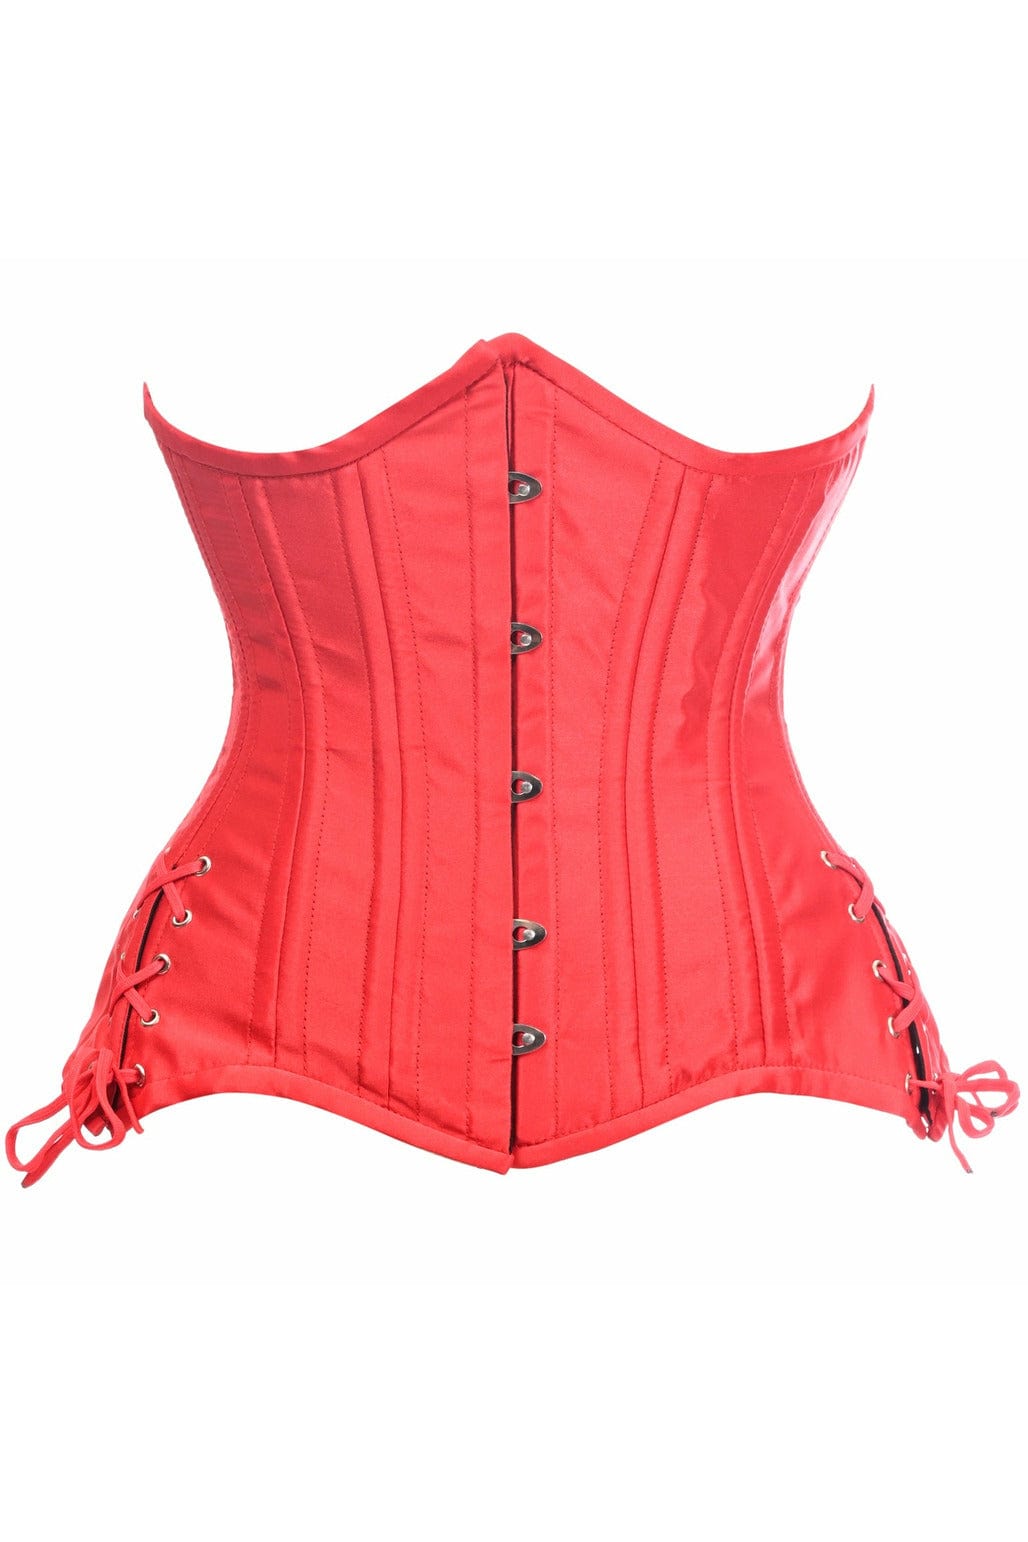 Deluxe Red Satin Double Steel Boned Curvy Cut Waist Cincher Corset with Lace-Up Sides Musotica.com